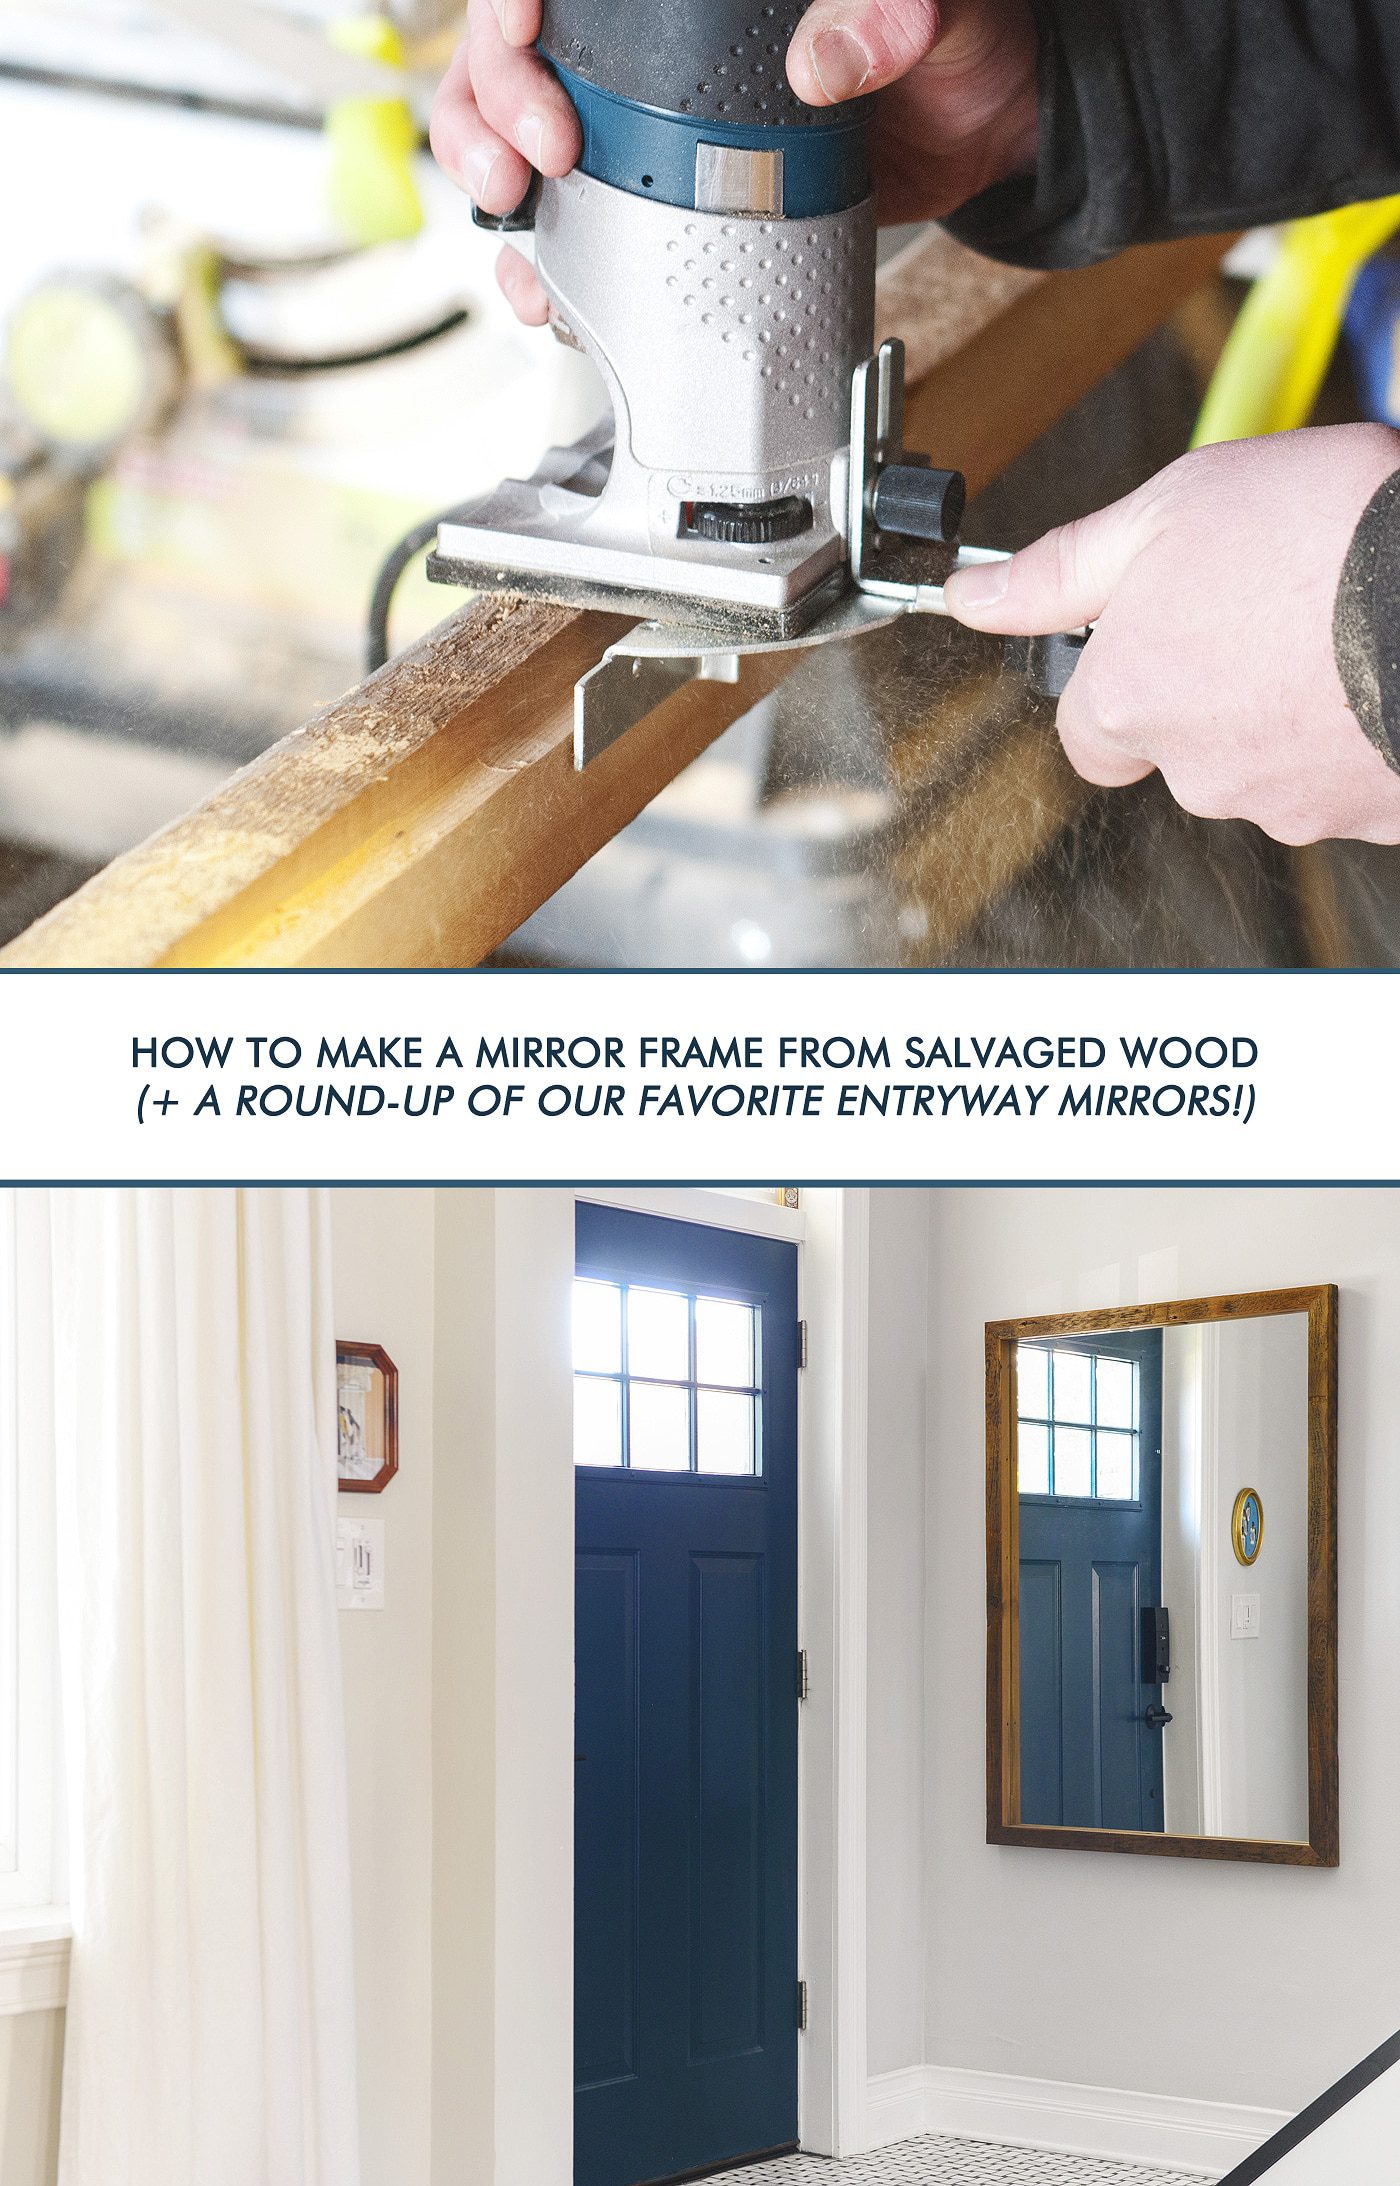 How to make a mirror frame from salvaged wood, plus a round-up of our favorite entryway mirrors! via Yellow Brick Home